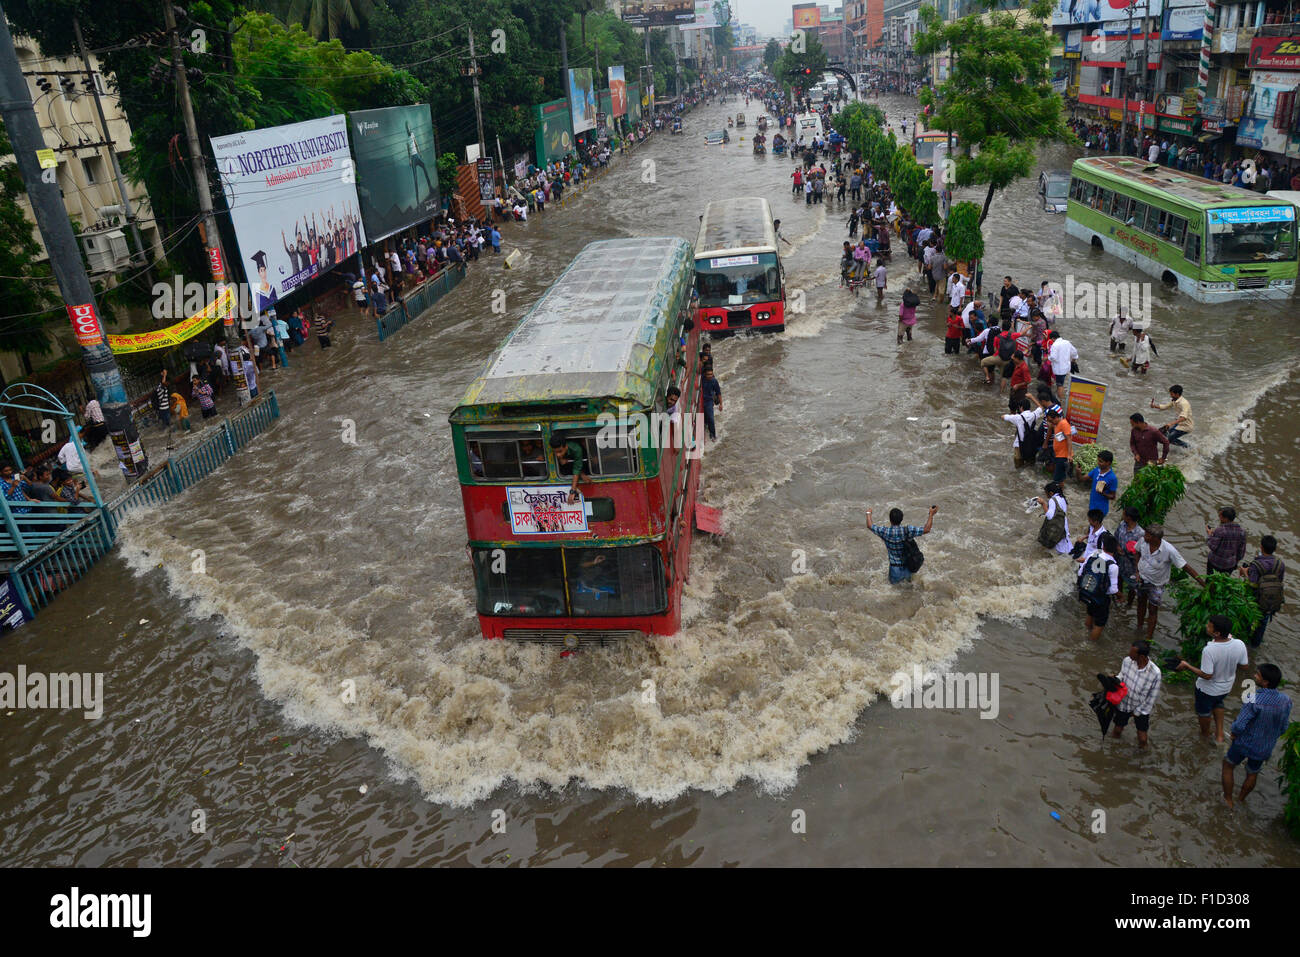 Dhaka, Bangladesh. 1st September, 2015. Vehicles try driving through the flooded Dhaka streets in Bangladesh. On September 1, 2015  Heavy monsoon downpour caused extreme flooding in most areas of Dhaka city, Bangladesh. Roads were submerged making travel slow and harmful. Credit:  Mamunur Rashid/Alamy Live News Stock Photo